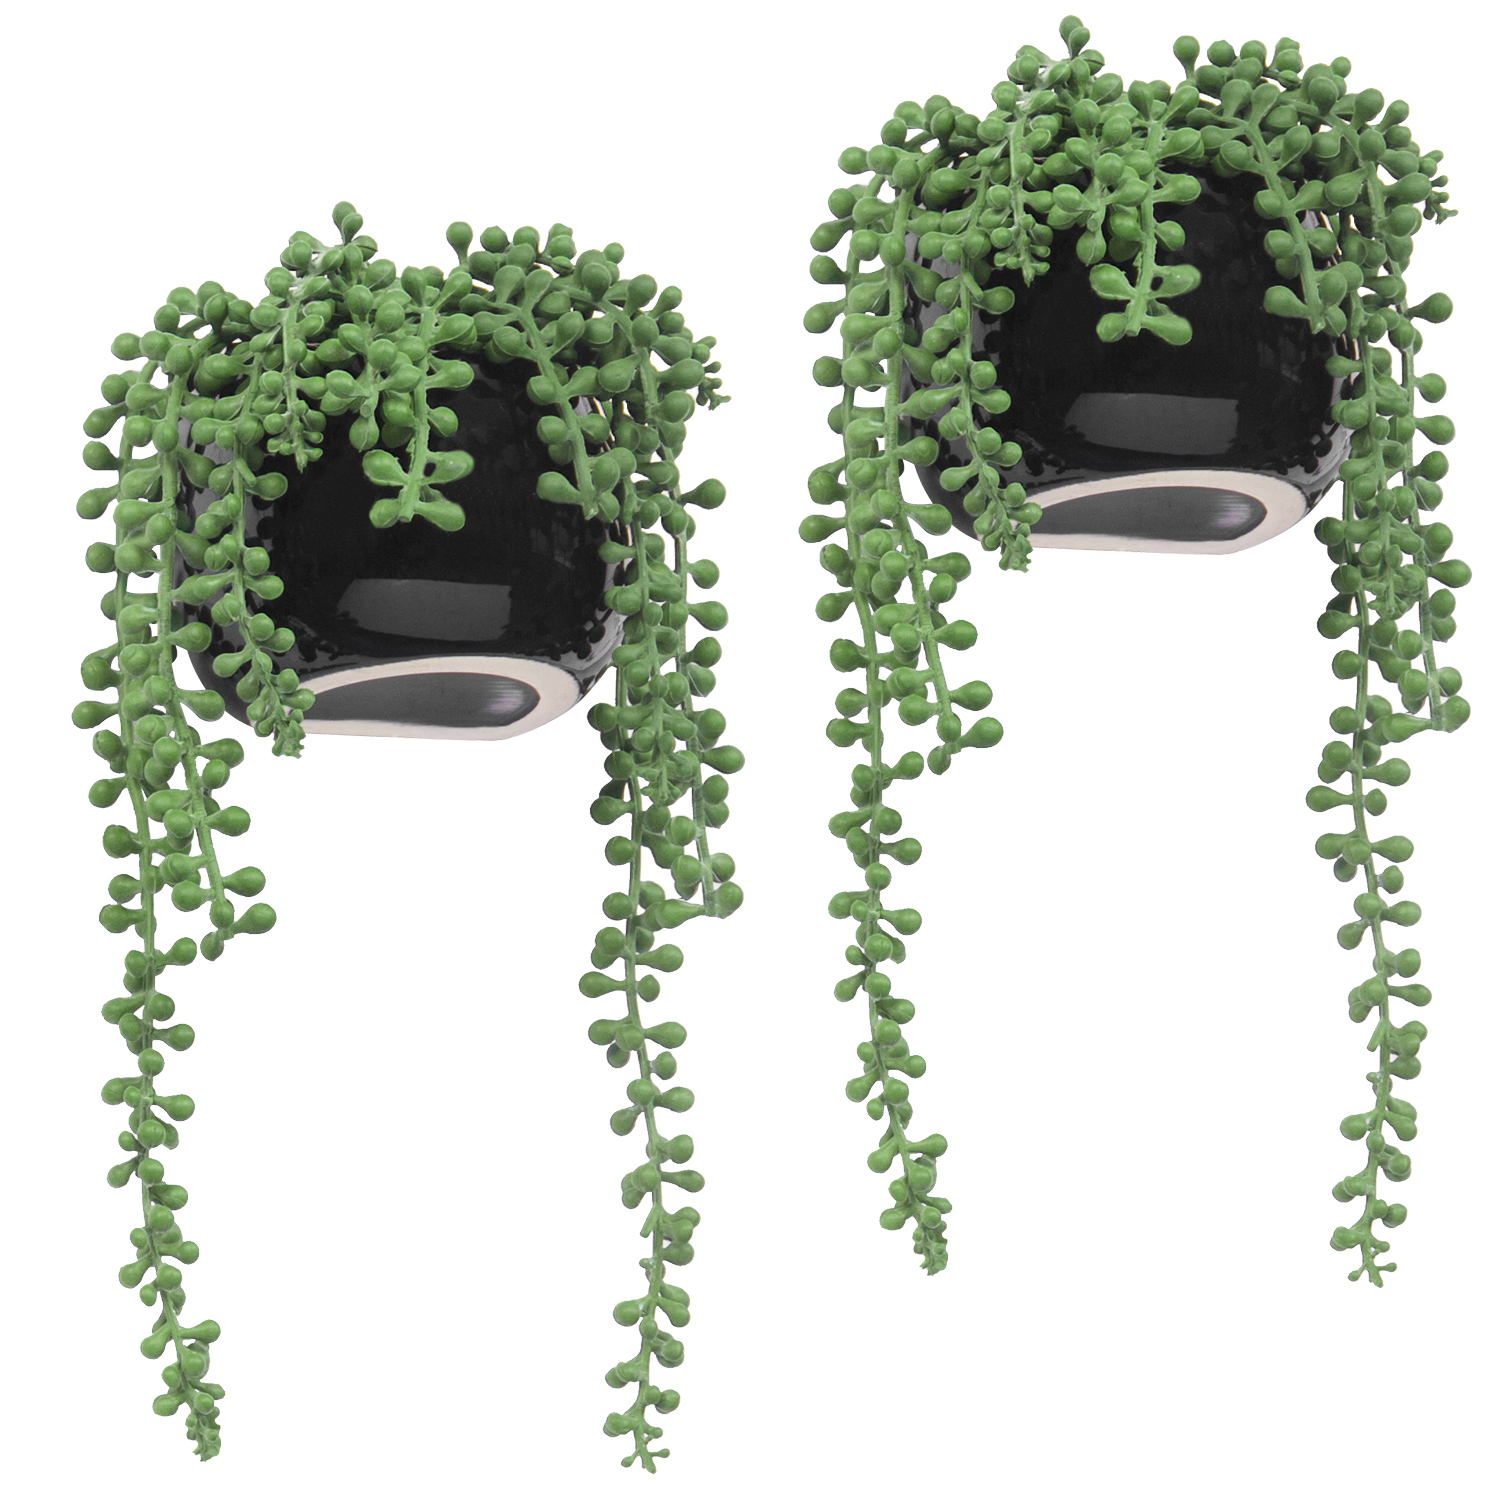 MyGift 10-inch Wall-Mounted Artificial String of Pearls Plants in Black Ceramic Planters, Set of 2 - image 1 of 3